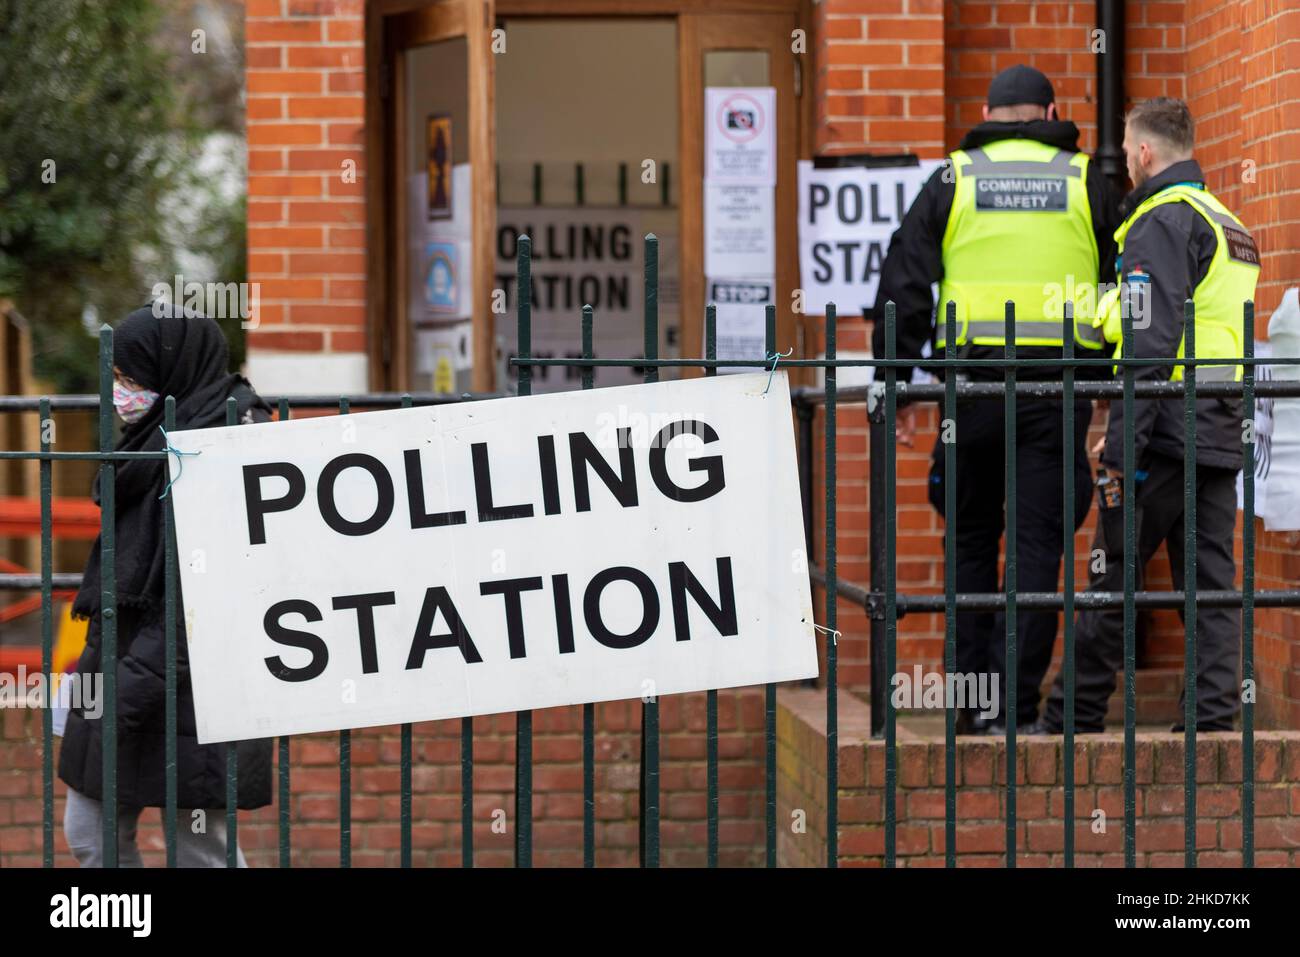 Polling station for the Southend West by-election to replace murdered MP Sir David Amess. Community safety officers entering. Security. Masked voter Stock Photo